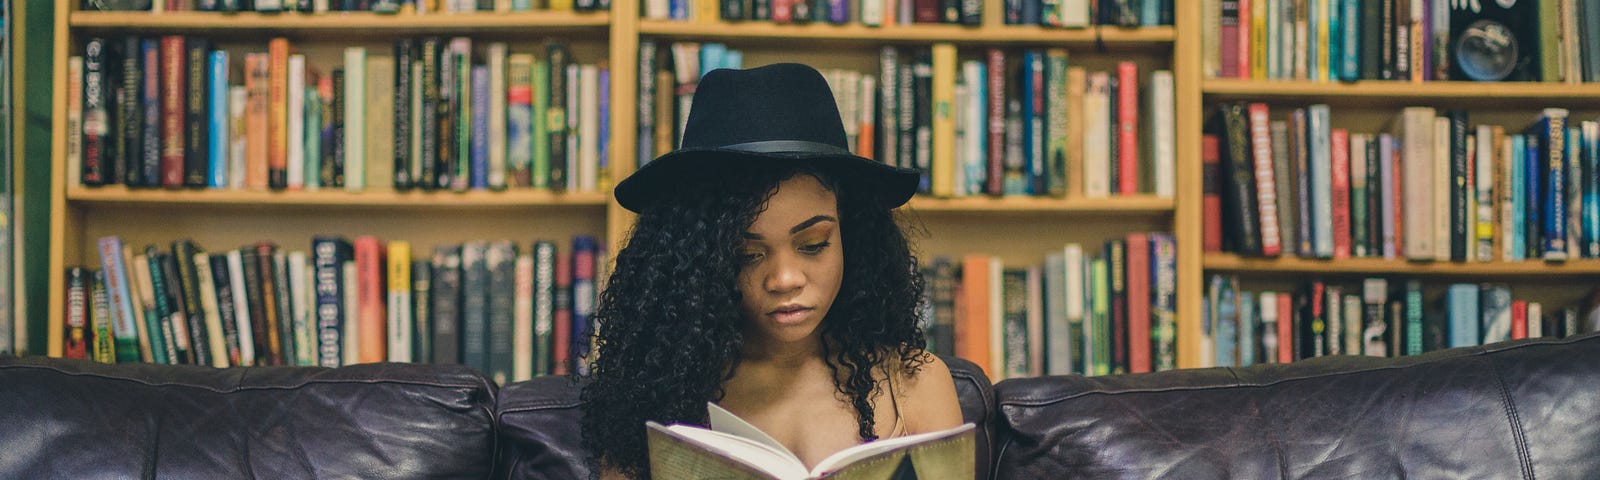 A black woman wearing a black hat reads a book in a library.